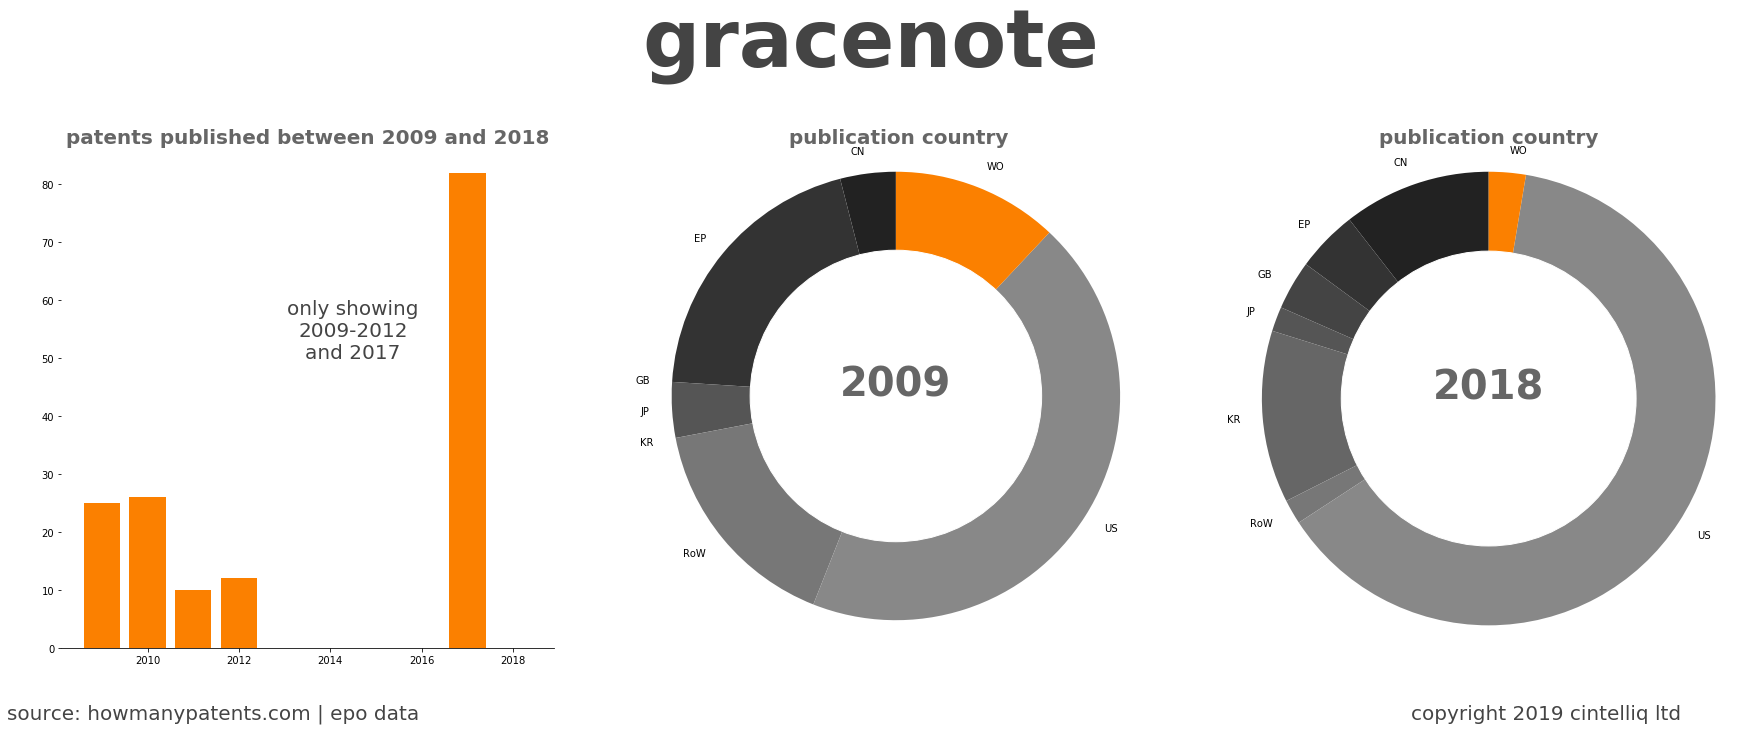 summary of patents for Gracenote